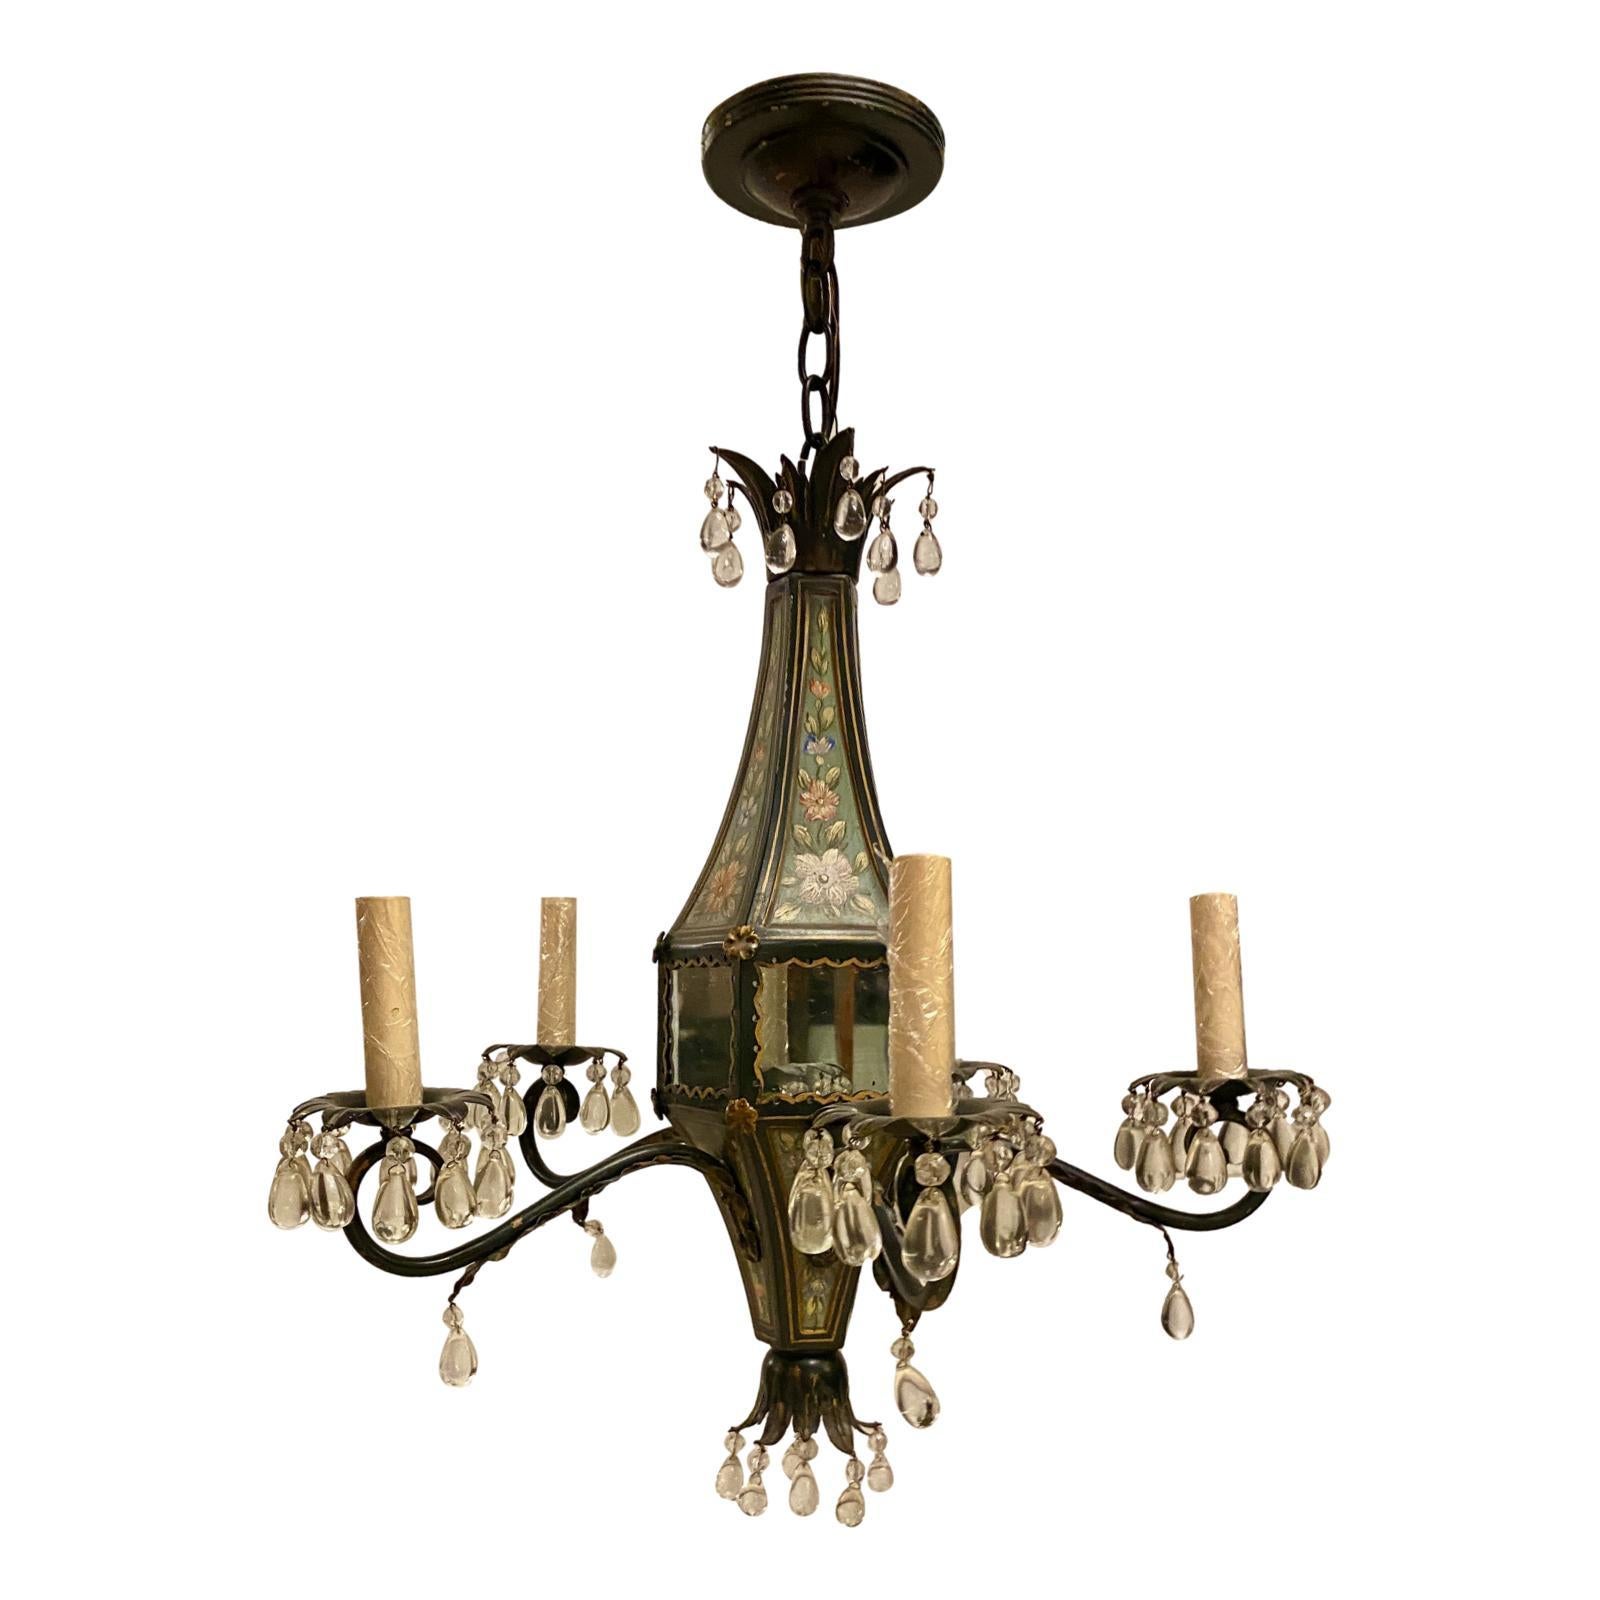 A circa 1940's French floral hand-painted tole chandelier with mirror insets on body and crystal pendants.

Measurements
Height: 22